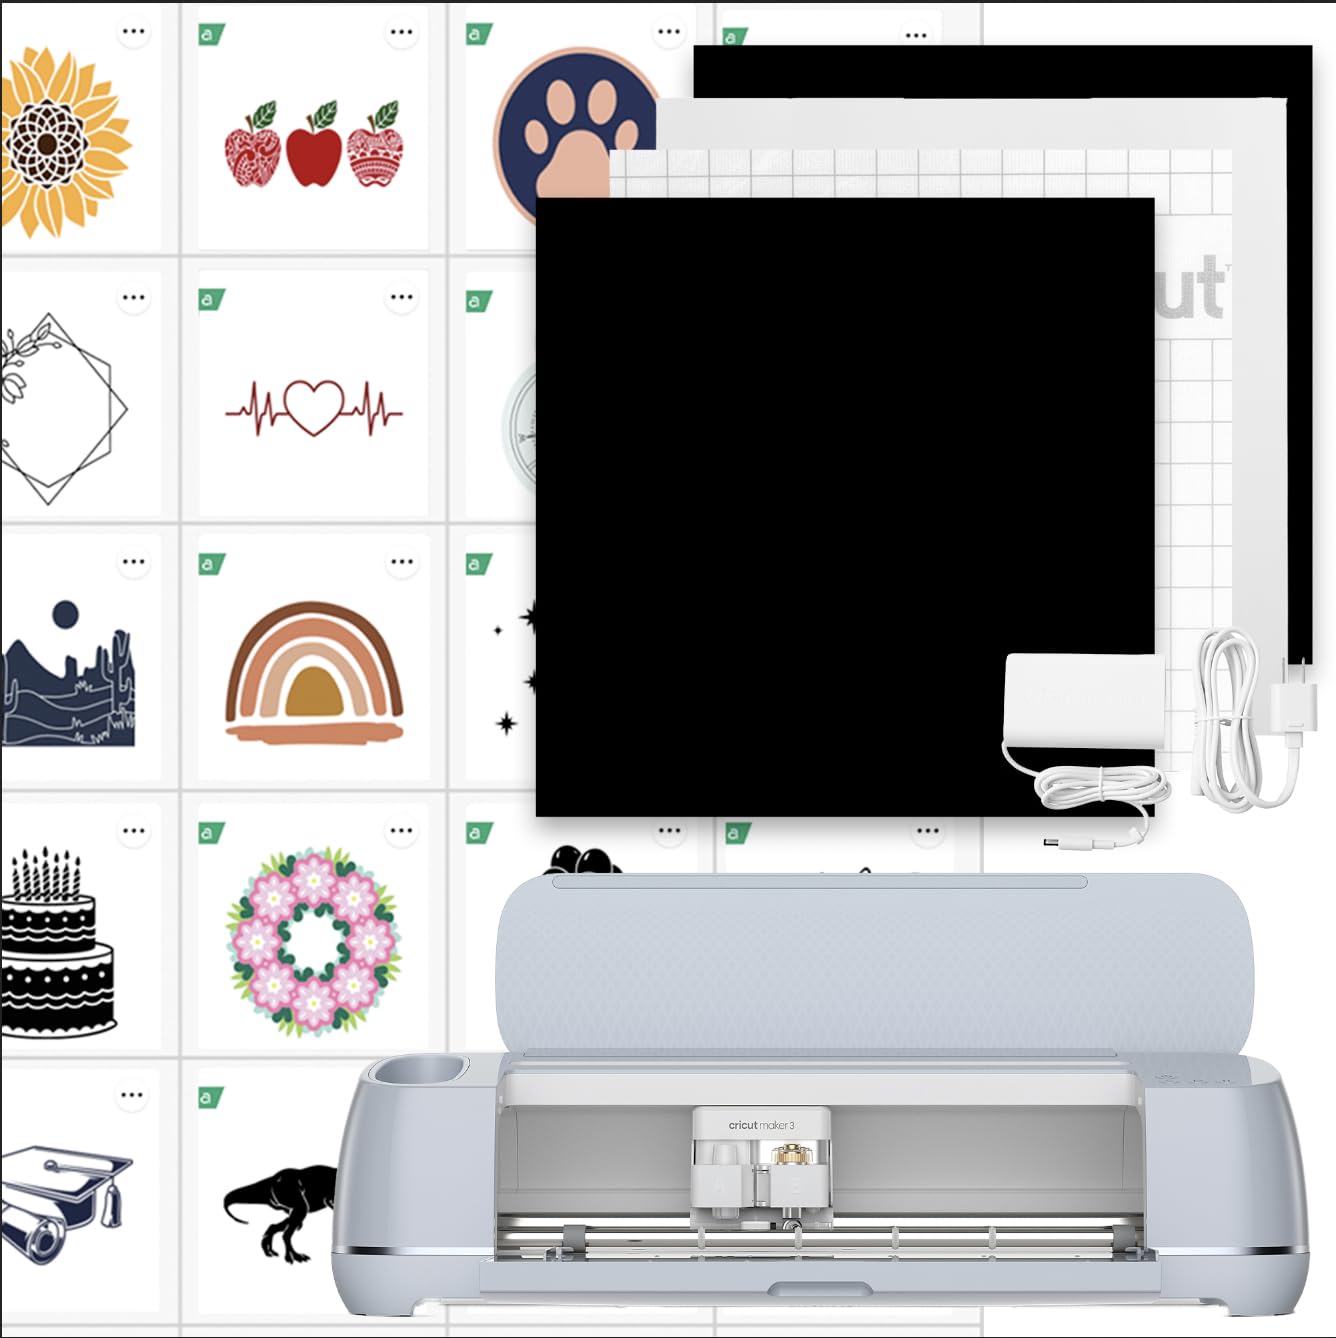 Cricut Maker 3 & Digital Content Library Bundle - Includes 30 images in Design Space App - Smart Cutting Machine, 2X Faster & 10X Cutting Force, Cuts